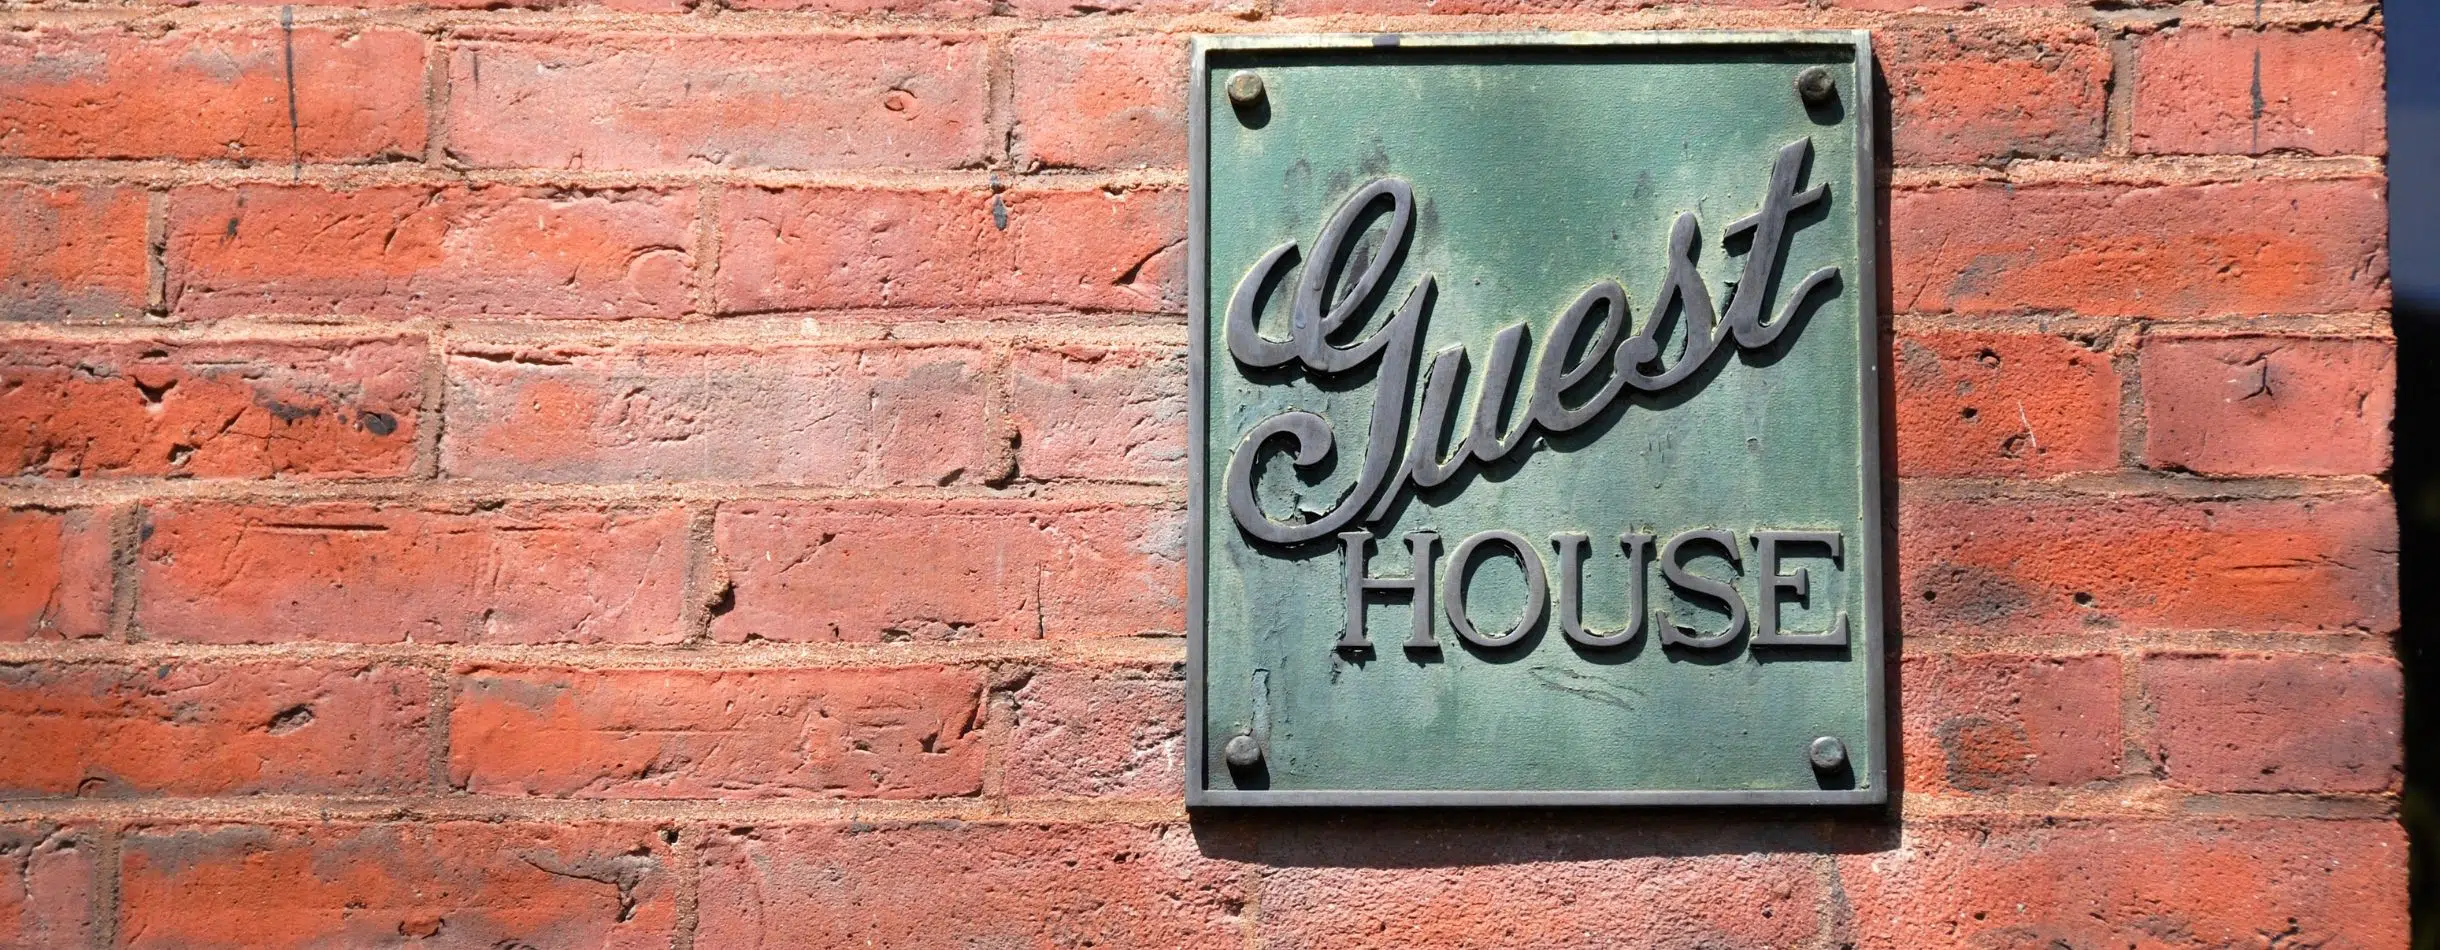 Guest House sign on brick wall.